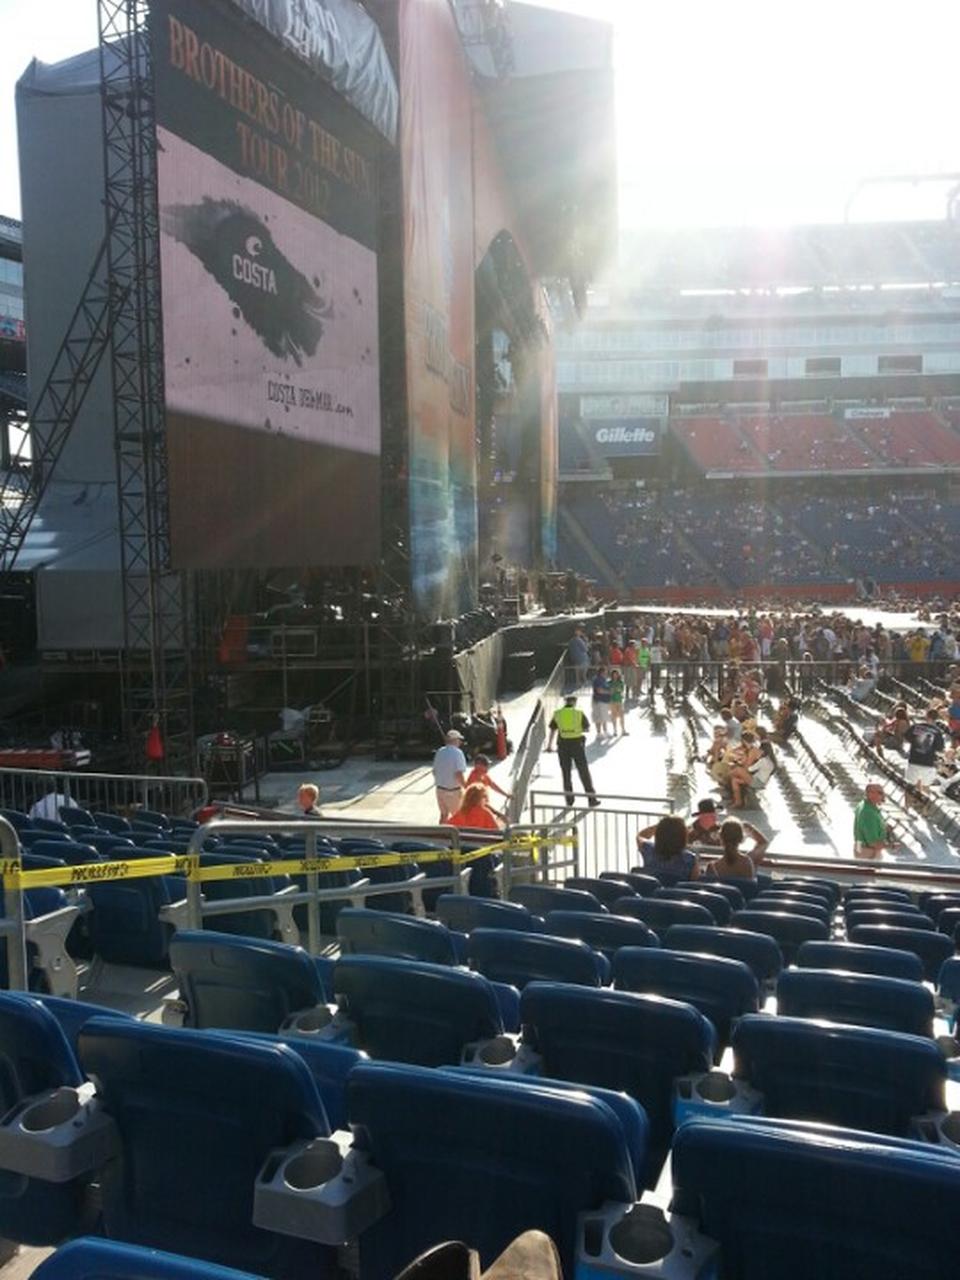 section 114, row 10 seat view  for concert - gillette stadium